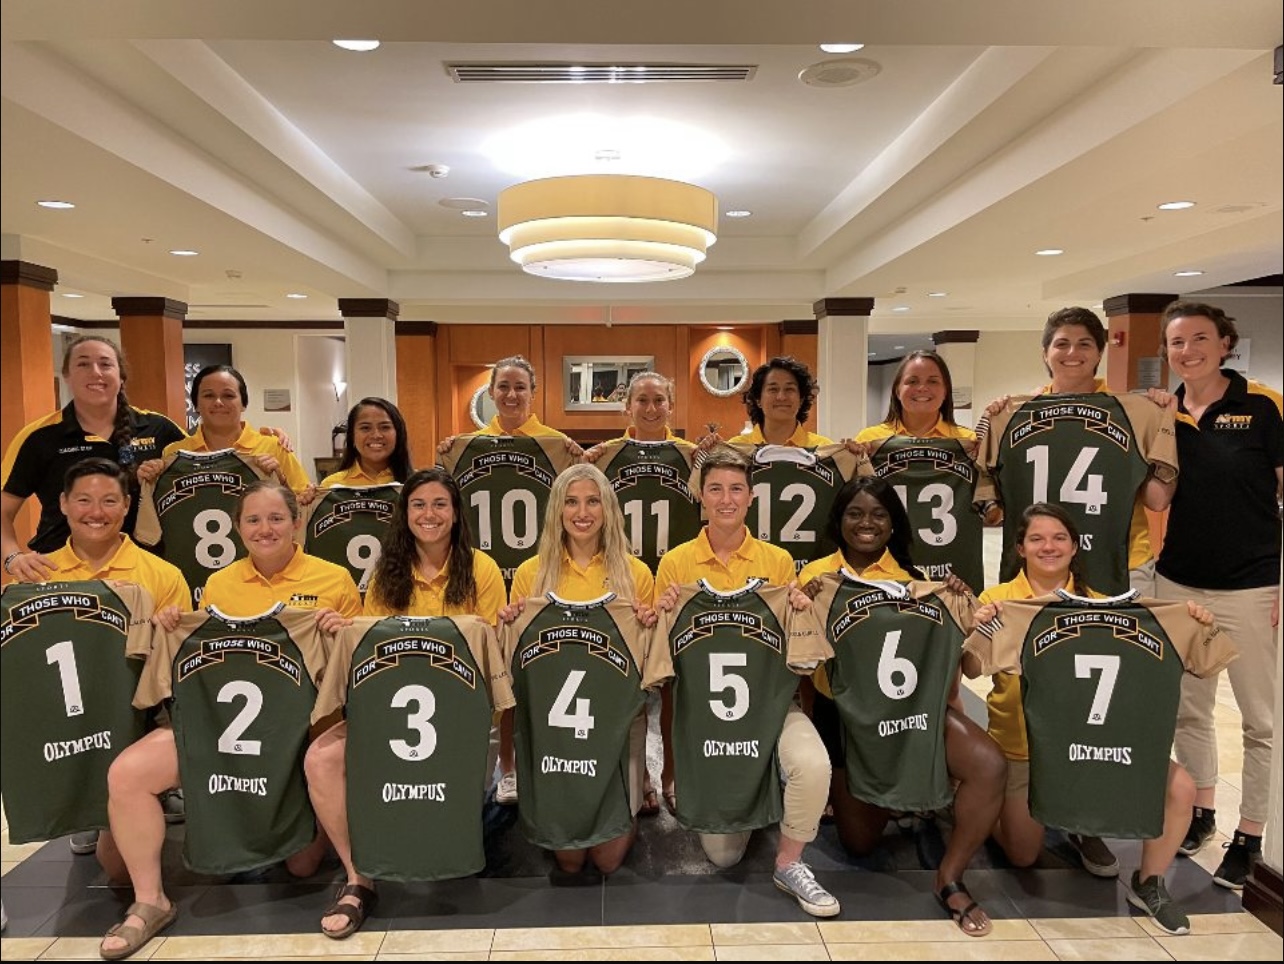 Y-12er Ally Derthick picked up rugby and became the only athlete from the National Guard on the 14-member All-Army Women’s Rugby team. She’s also one of 90 athletes (men and women) in the U.S. Army to be named to an All-Army athletics team